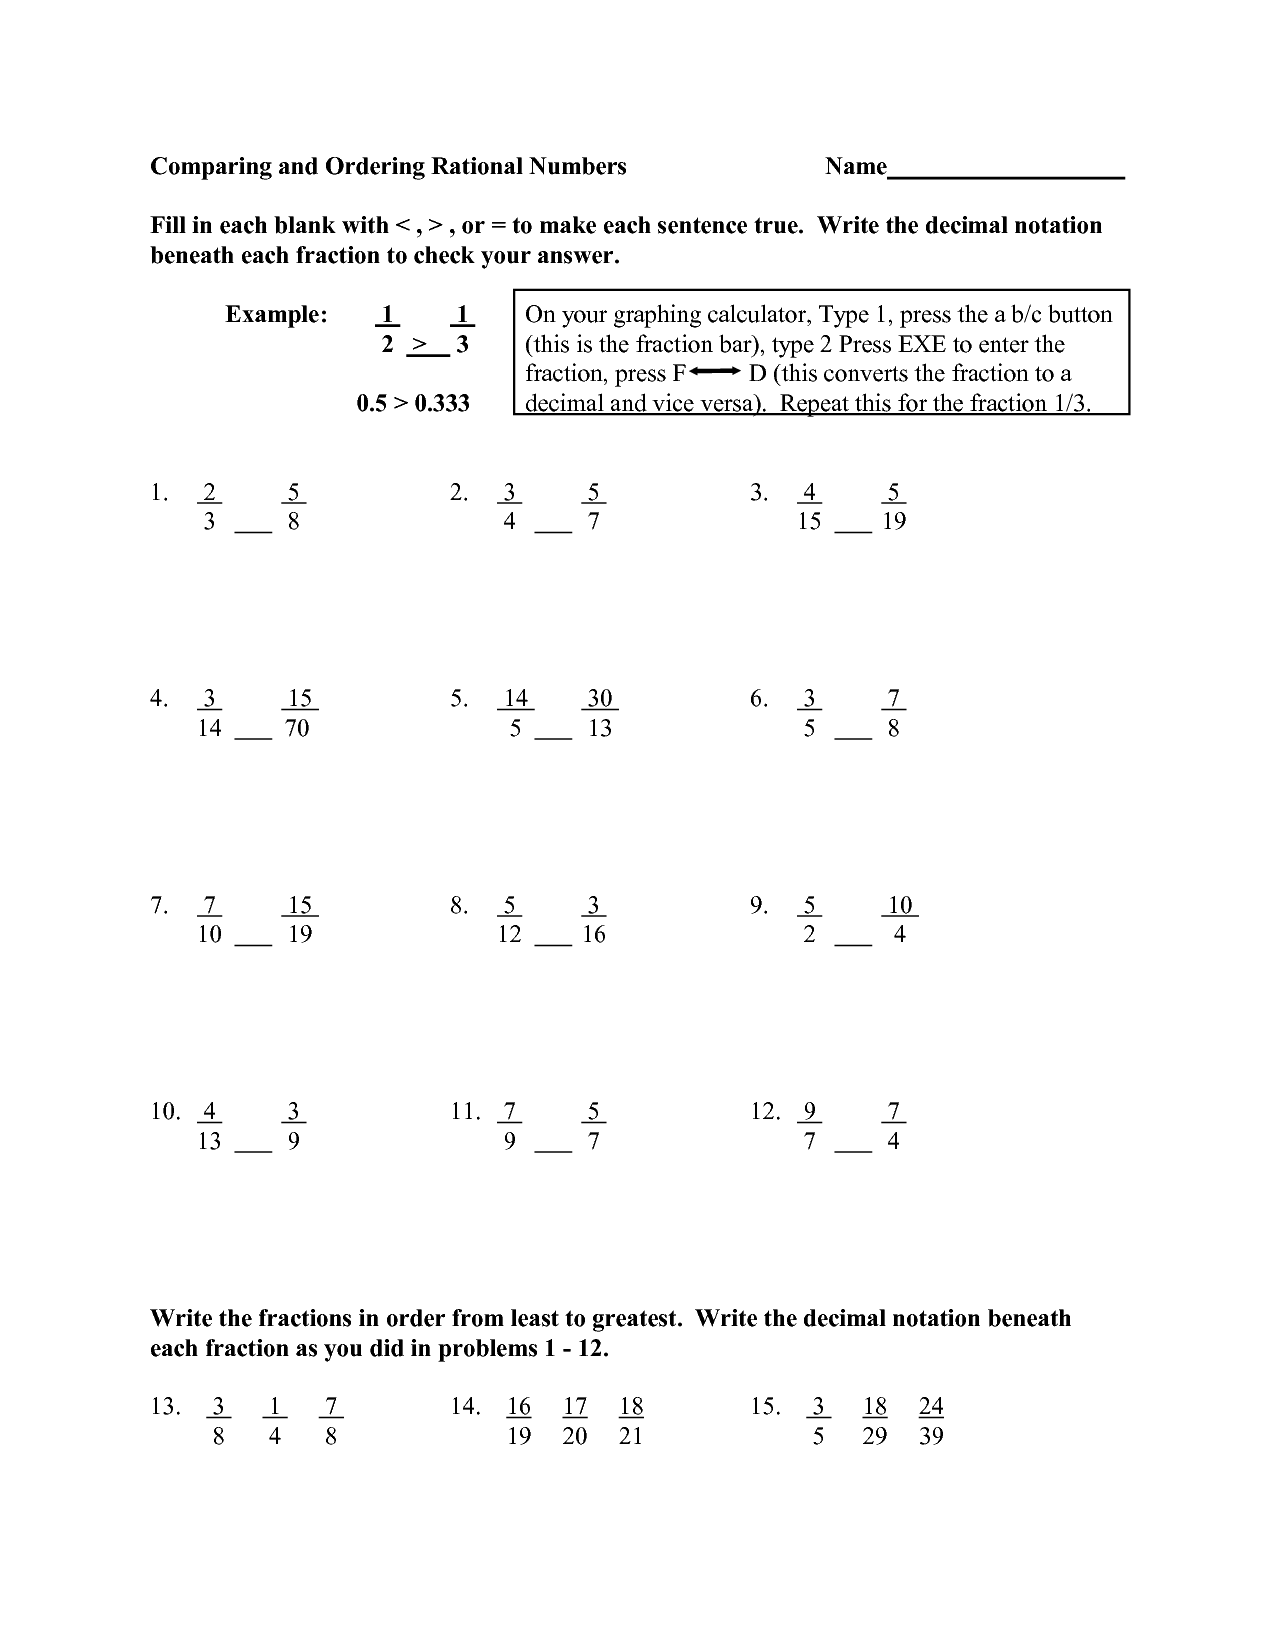 Rational And Irrational Numbers Worksheet